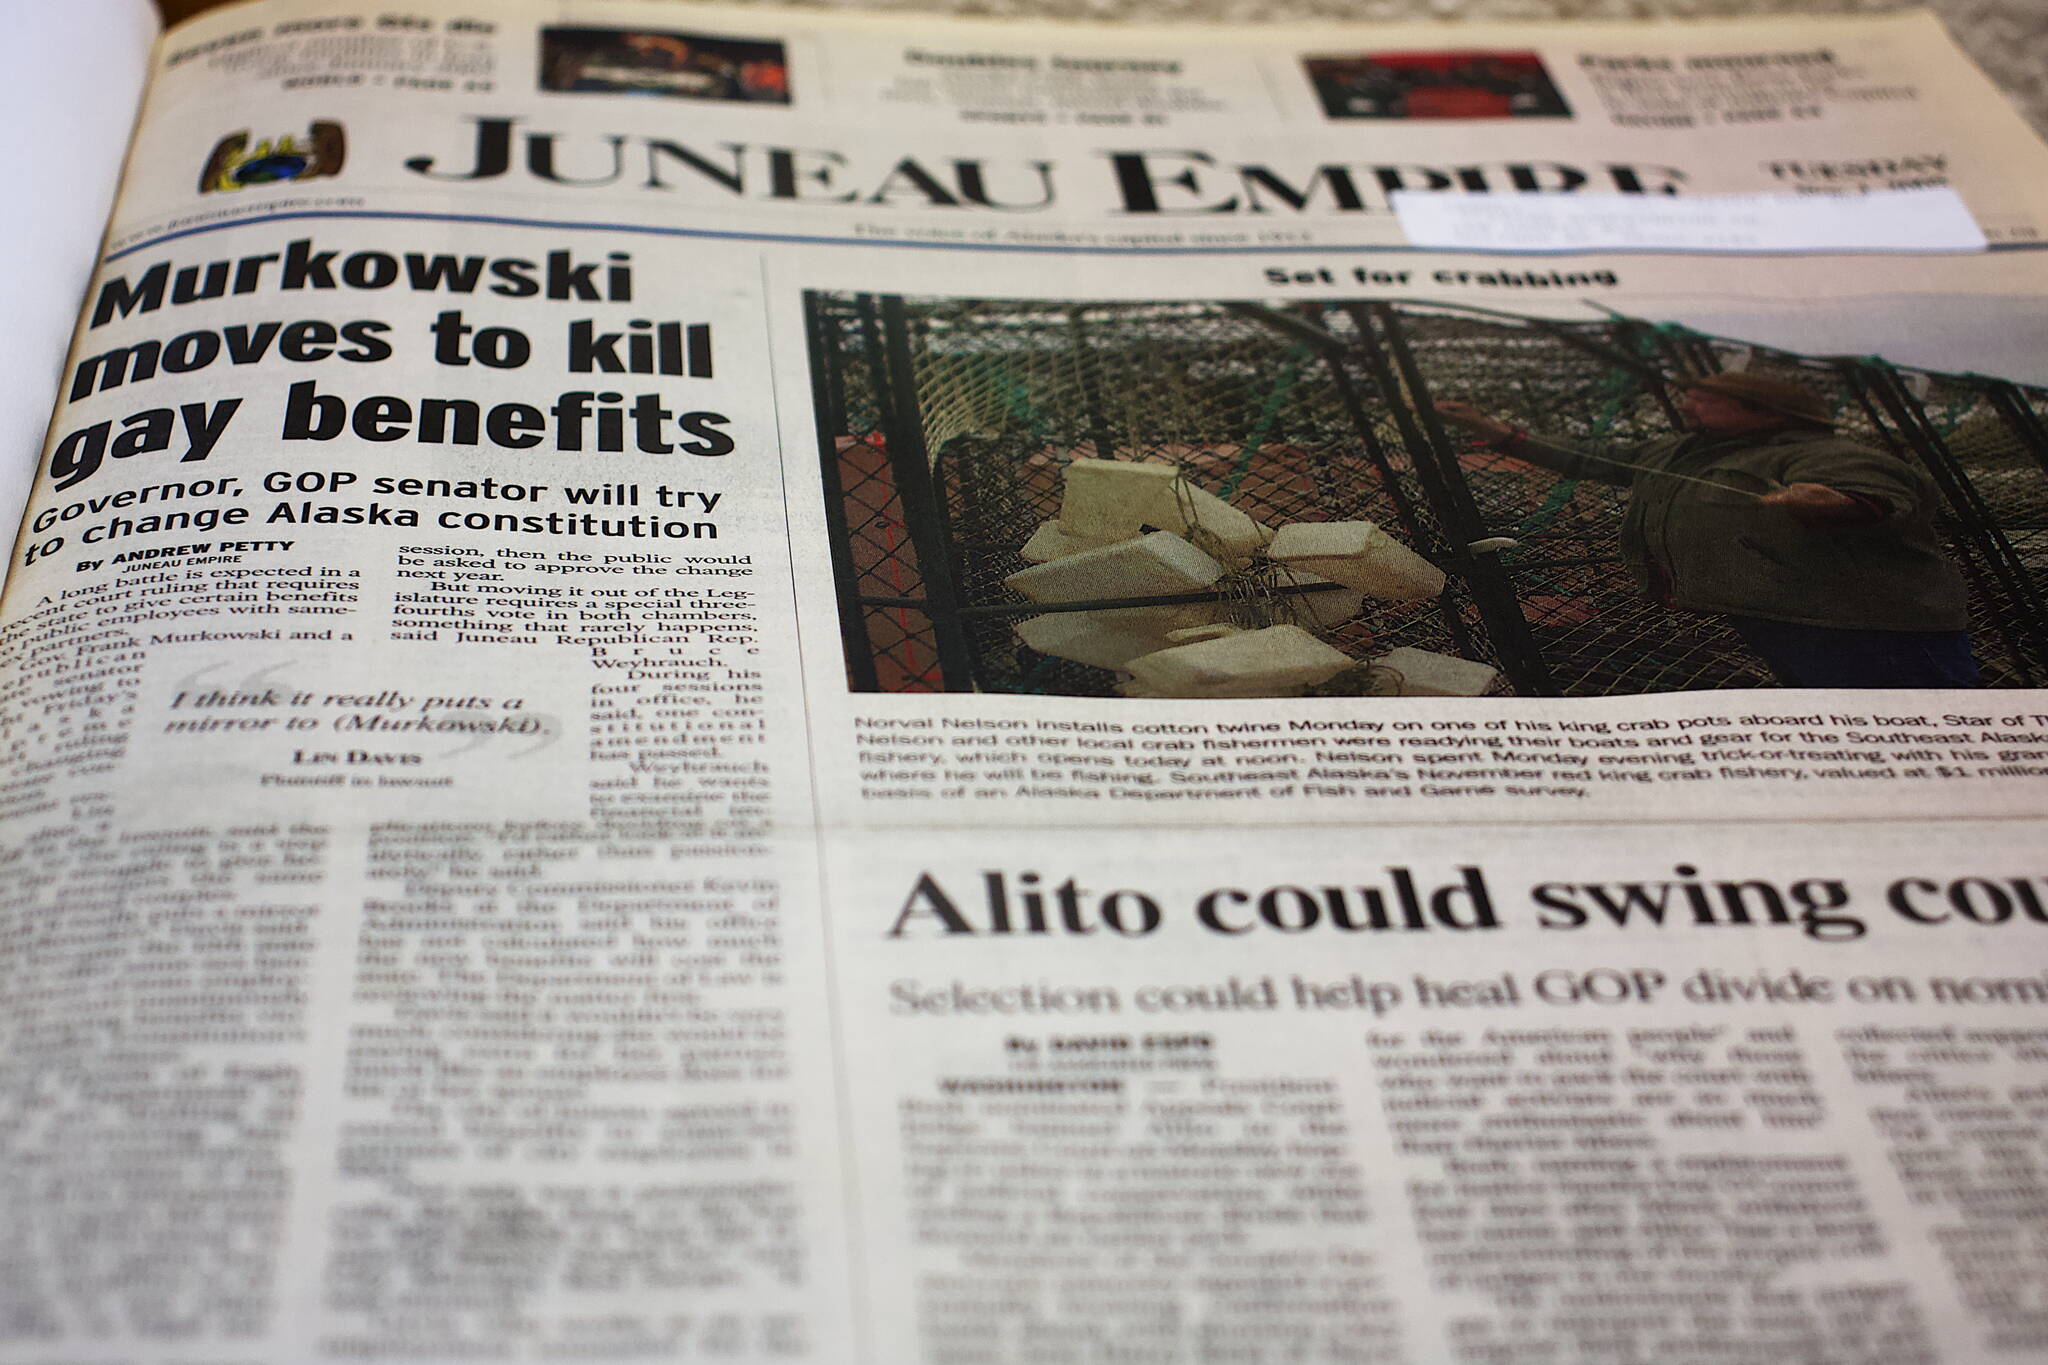 The front page of the Juneau Empire on Nov. 1, 2005. (Photo by Mark Sabbatini / Juneau Empire)